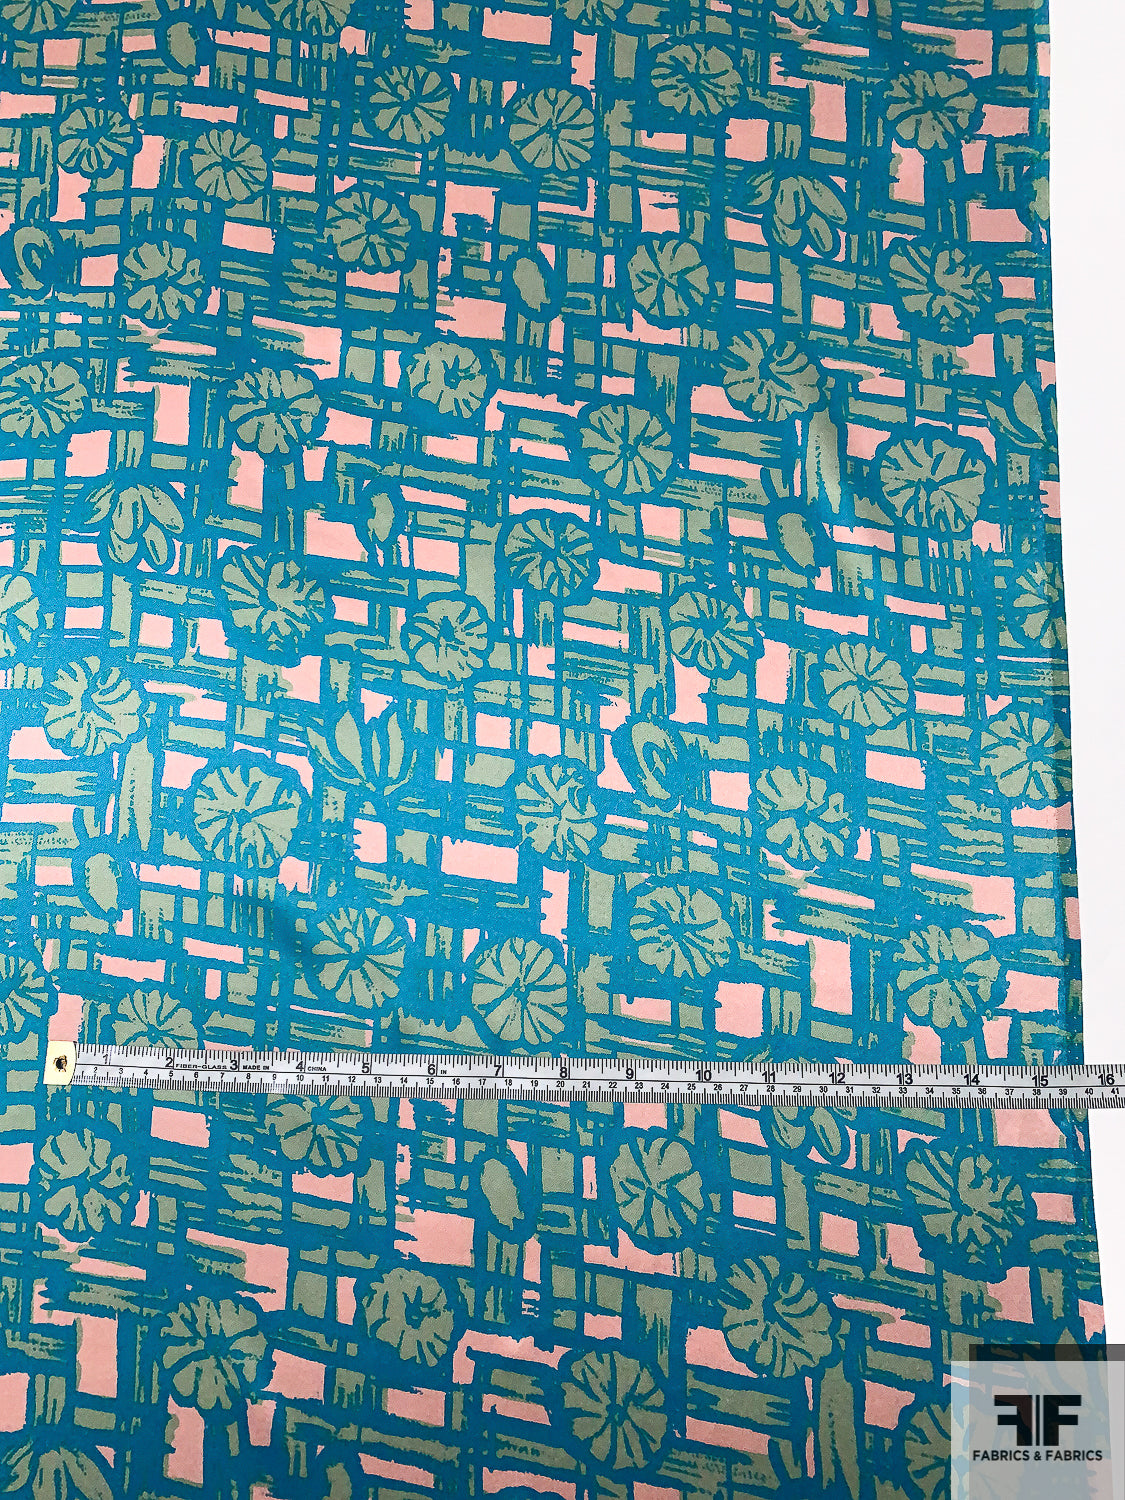 Sketchy Floral Fence Printed Silk Charmeuse - Teal / Moss Green / Blushy Pink